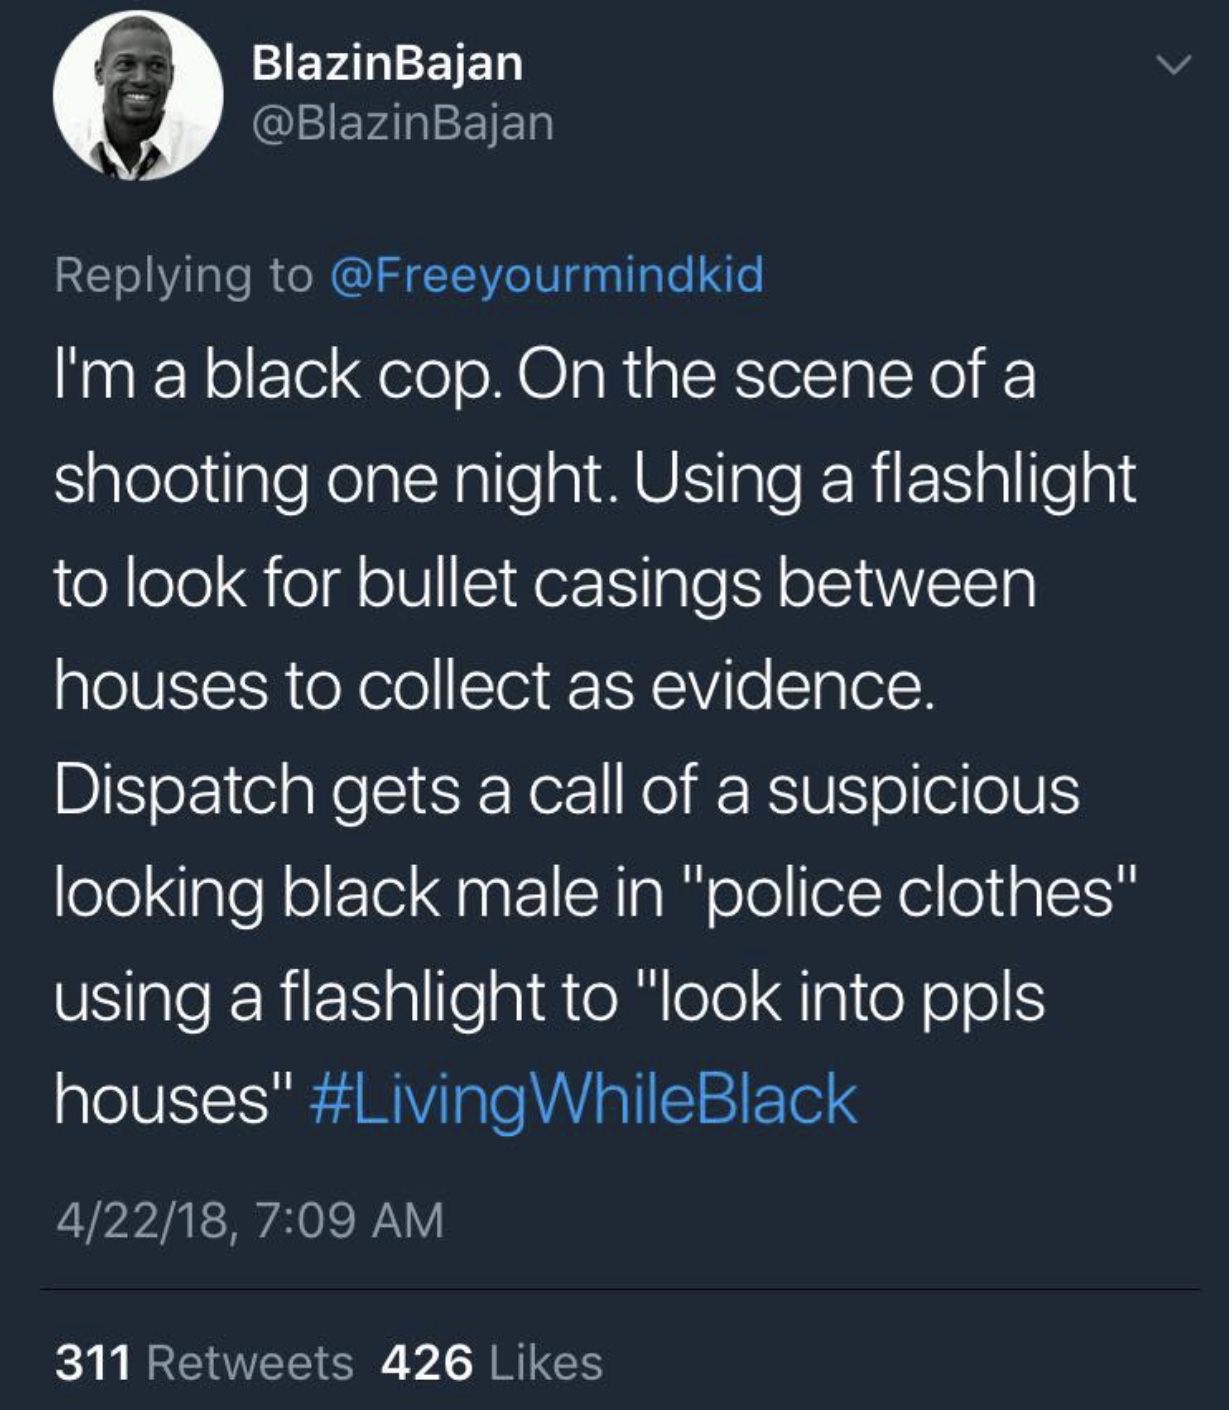 memes - ubume momo momo sculpture - BlazinBajan I'm a black cop. On the scene of a shooting one night. Using a flashlight to look for bullet casings between houses to collect as evidence. Dispatch gets a call of a suspicious looking black male in "police 